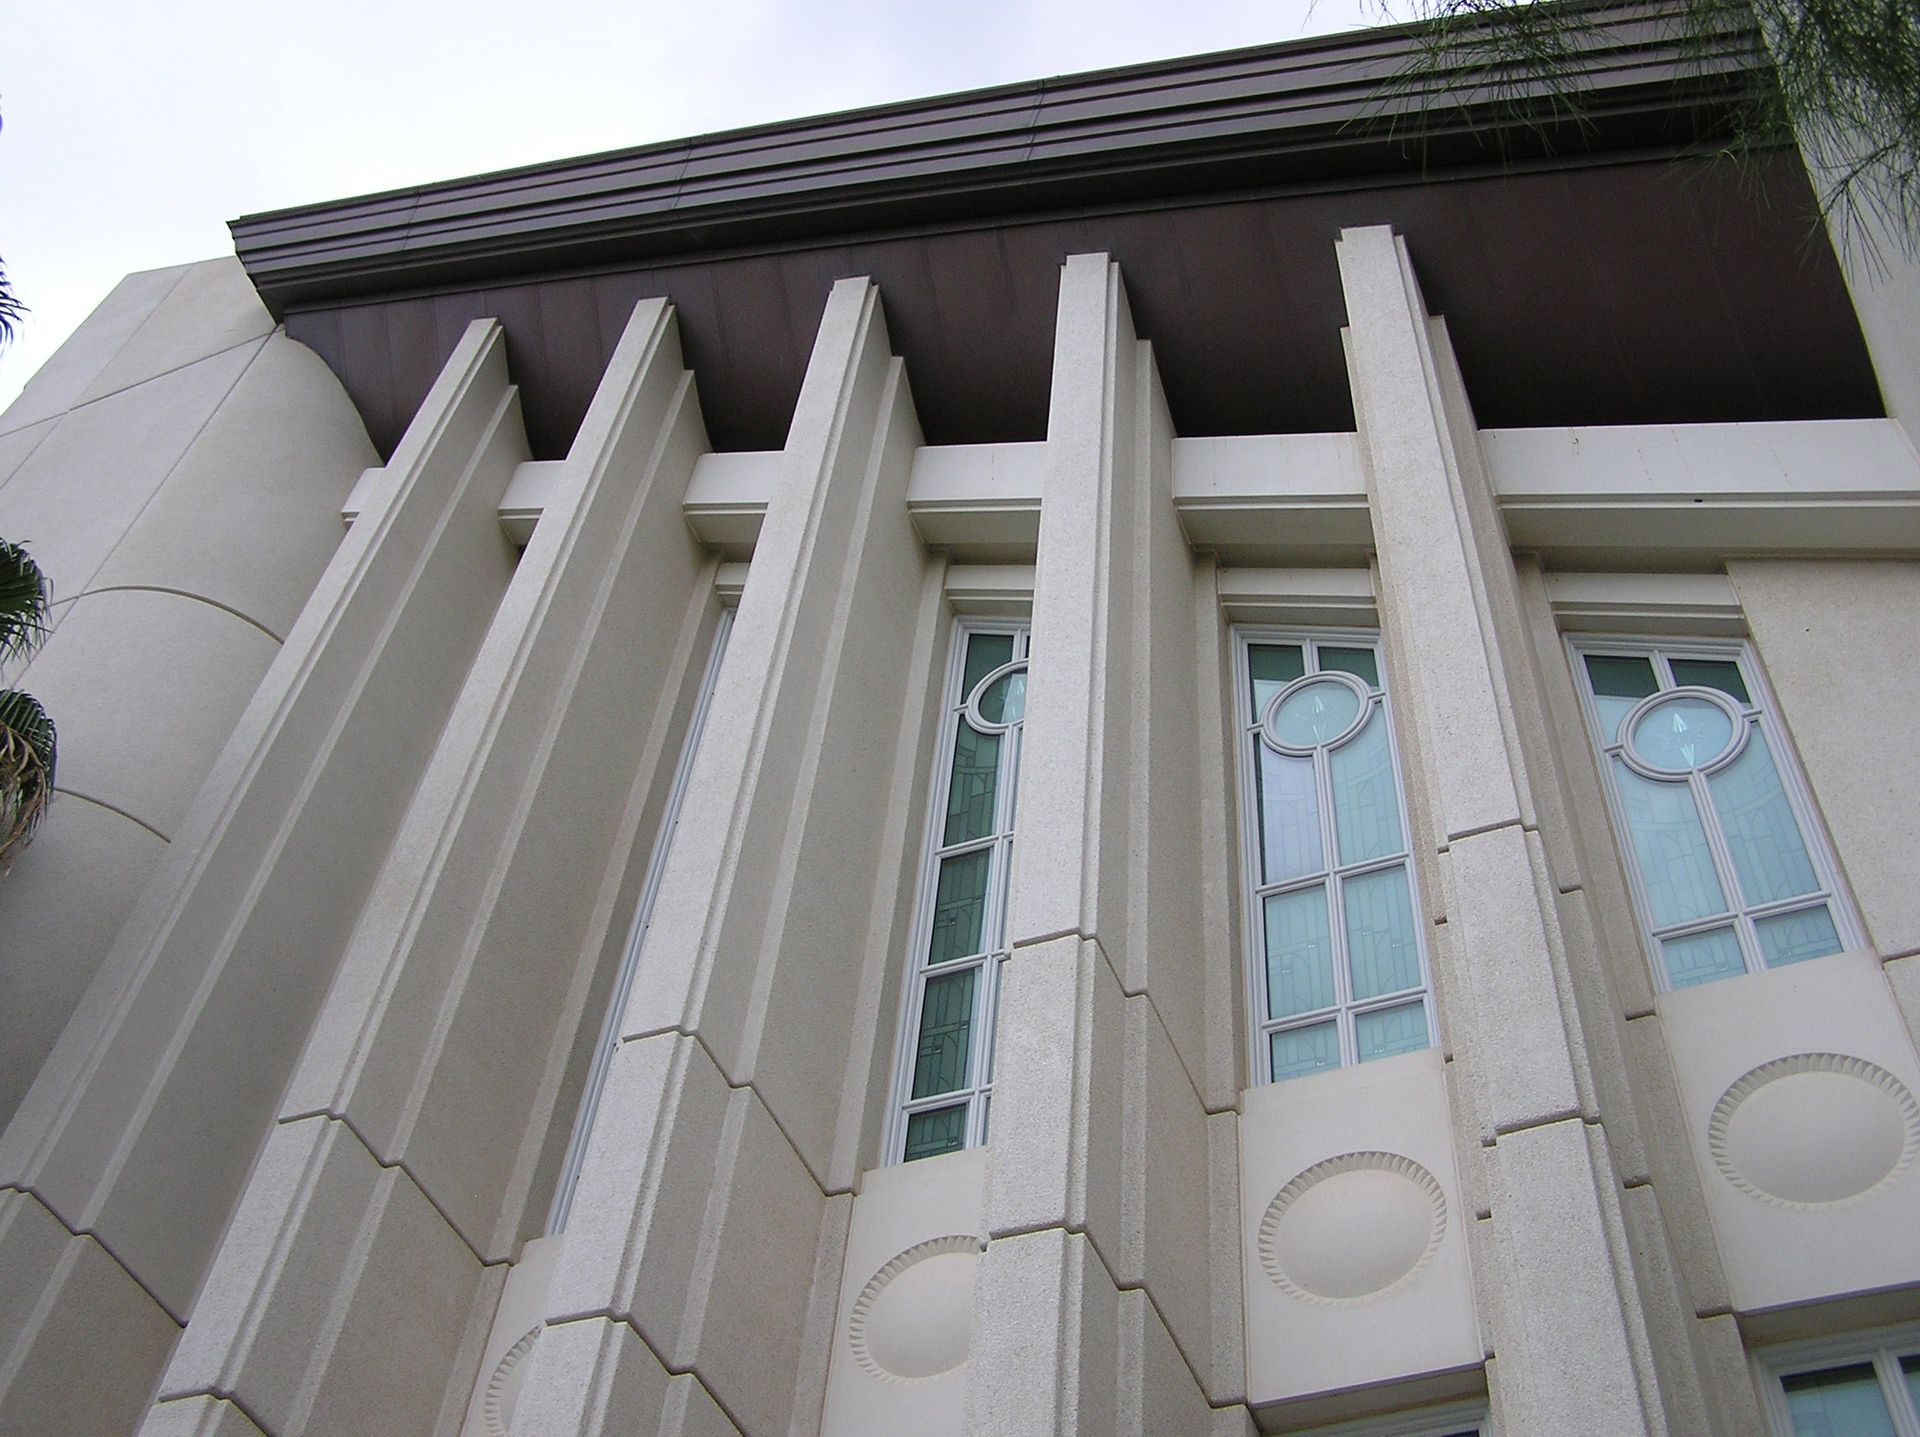 A side view of the Las Vegas Nevada Temple windows.